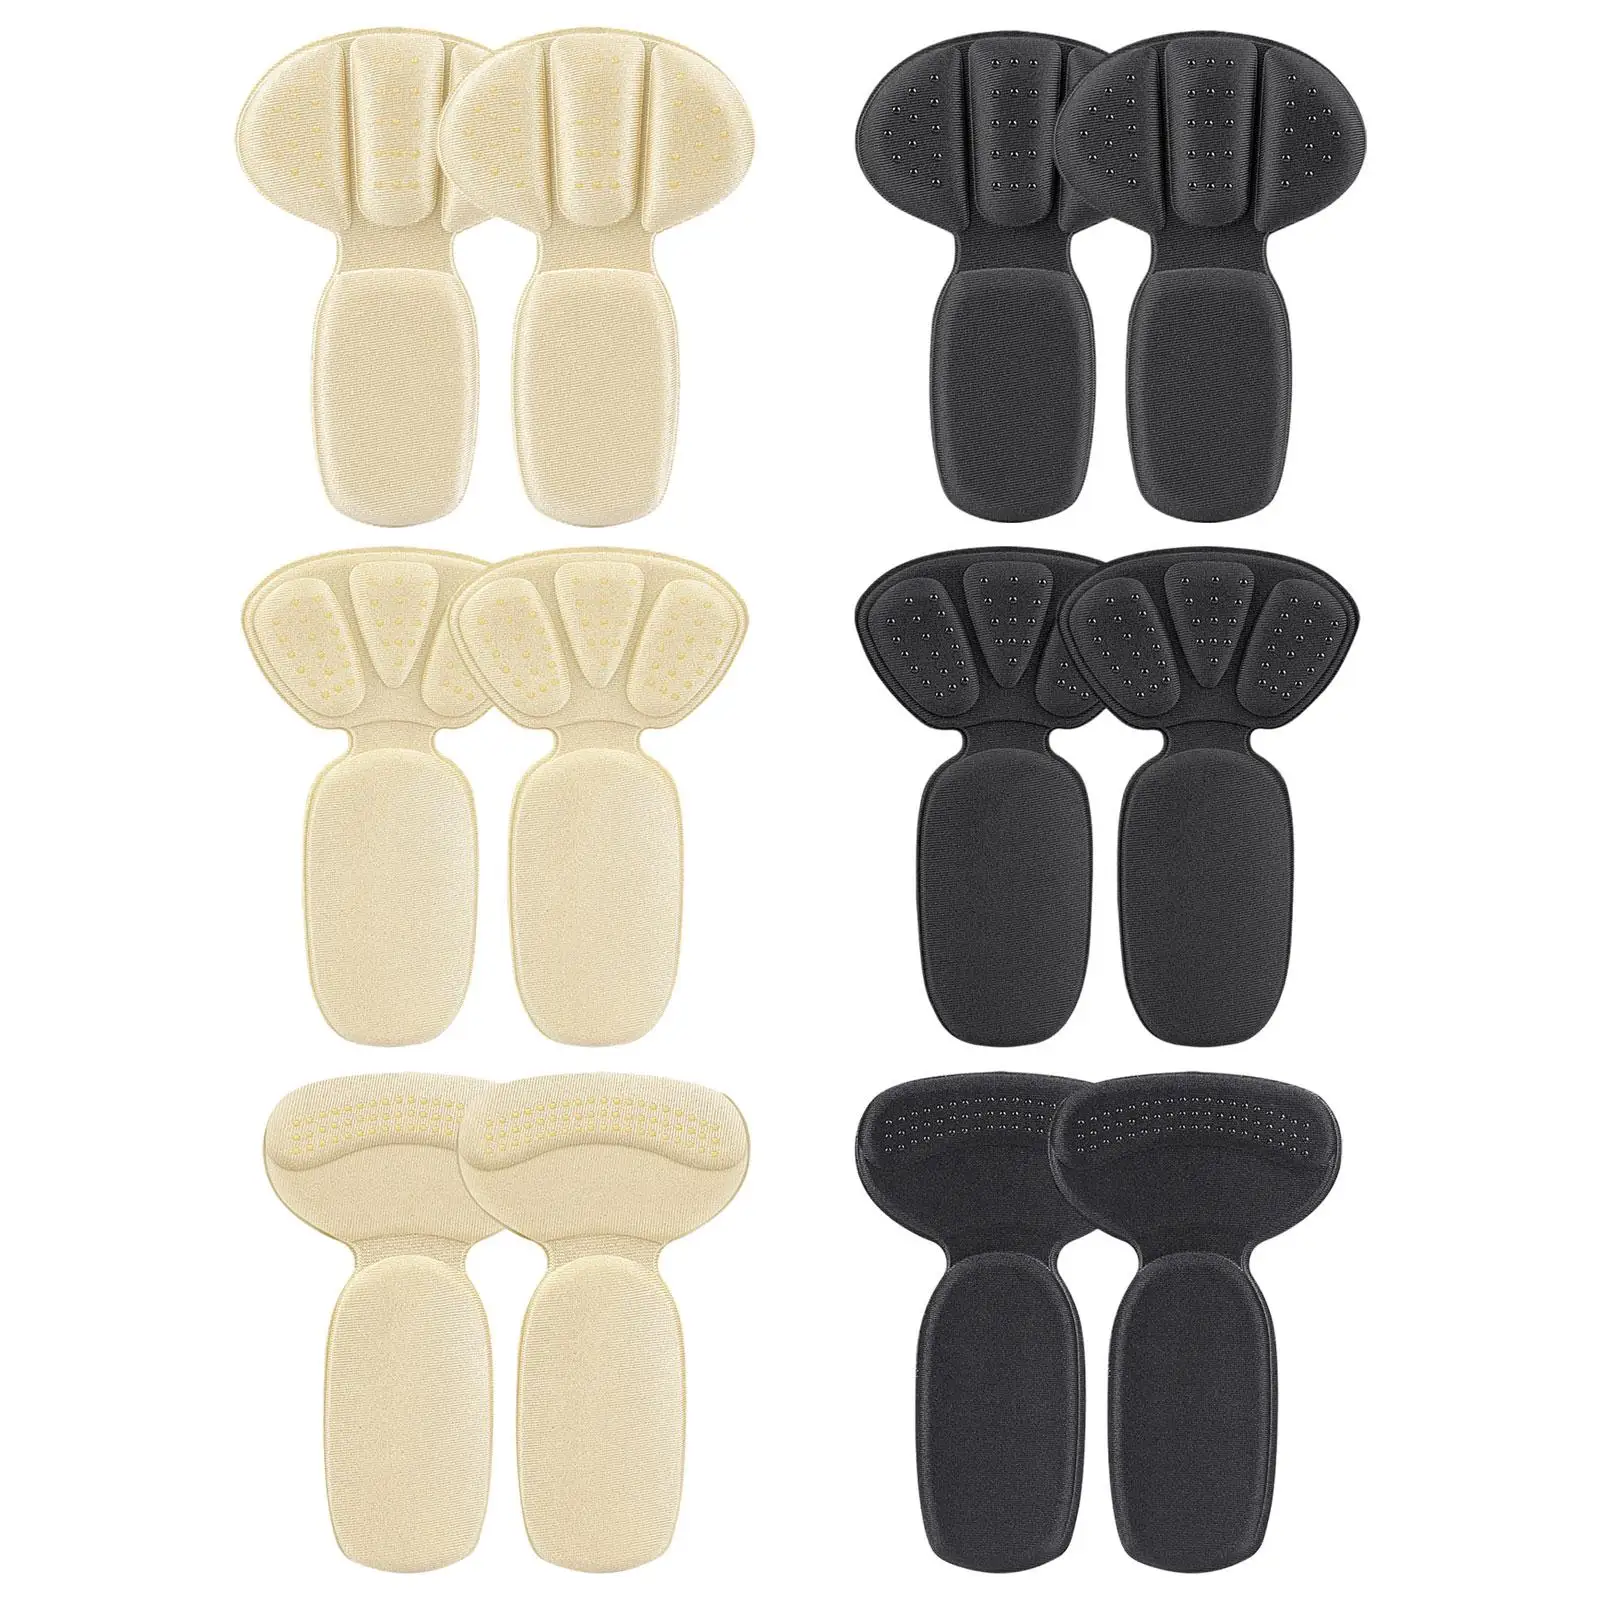 2 in 1 Heel Cushion Pads Soft Wear Resistant Shoe Pad Non Slip Oversized Shoes Heel Liners Heel Cushion Inserts Heel Protector